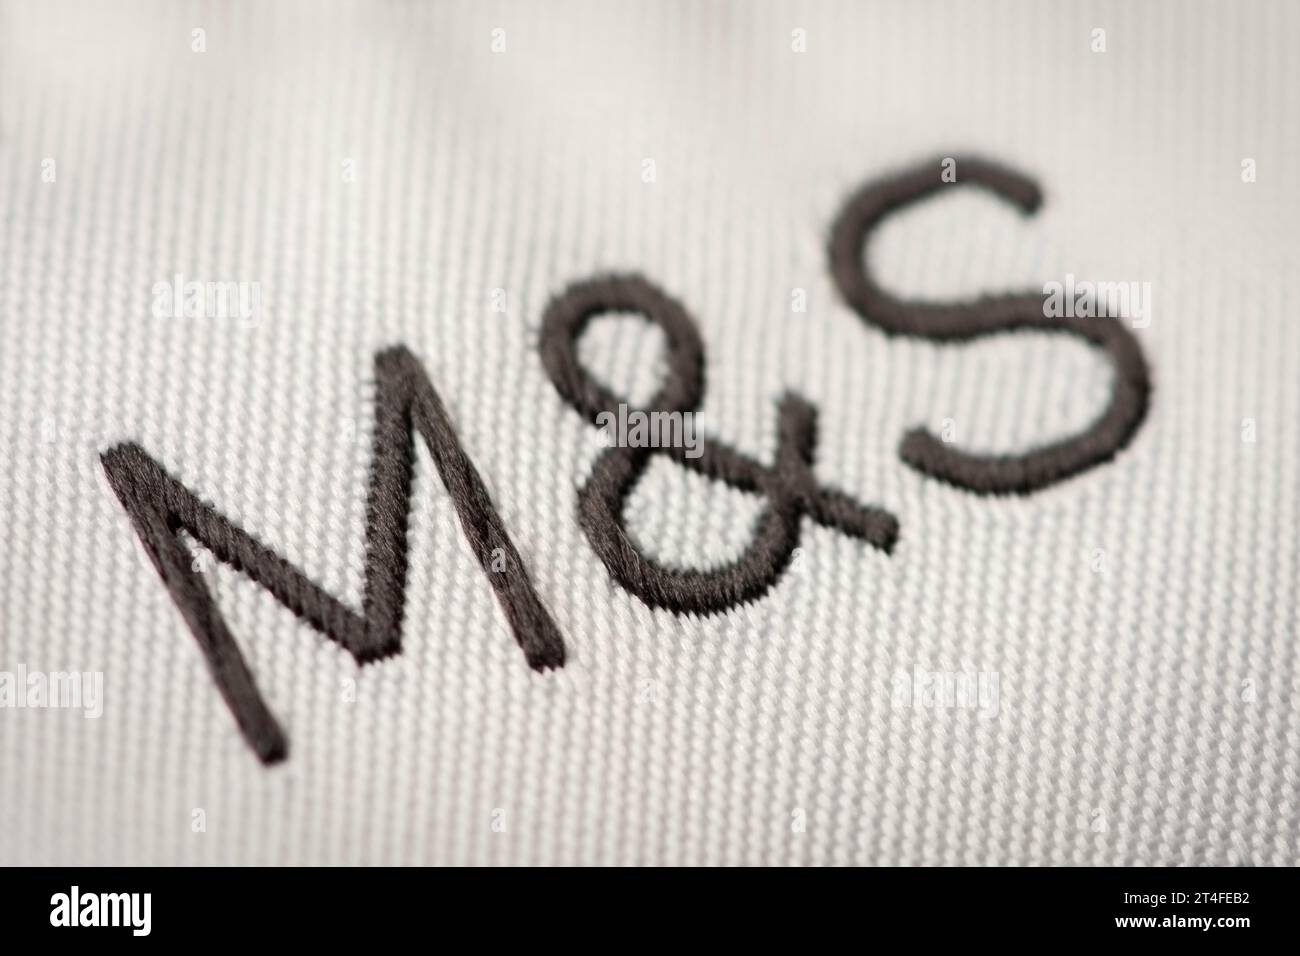 A close-up of an embroidered M&S logo as seen on a tag. Stock Photo